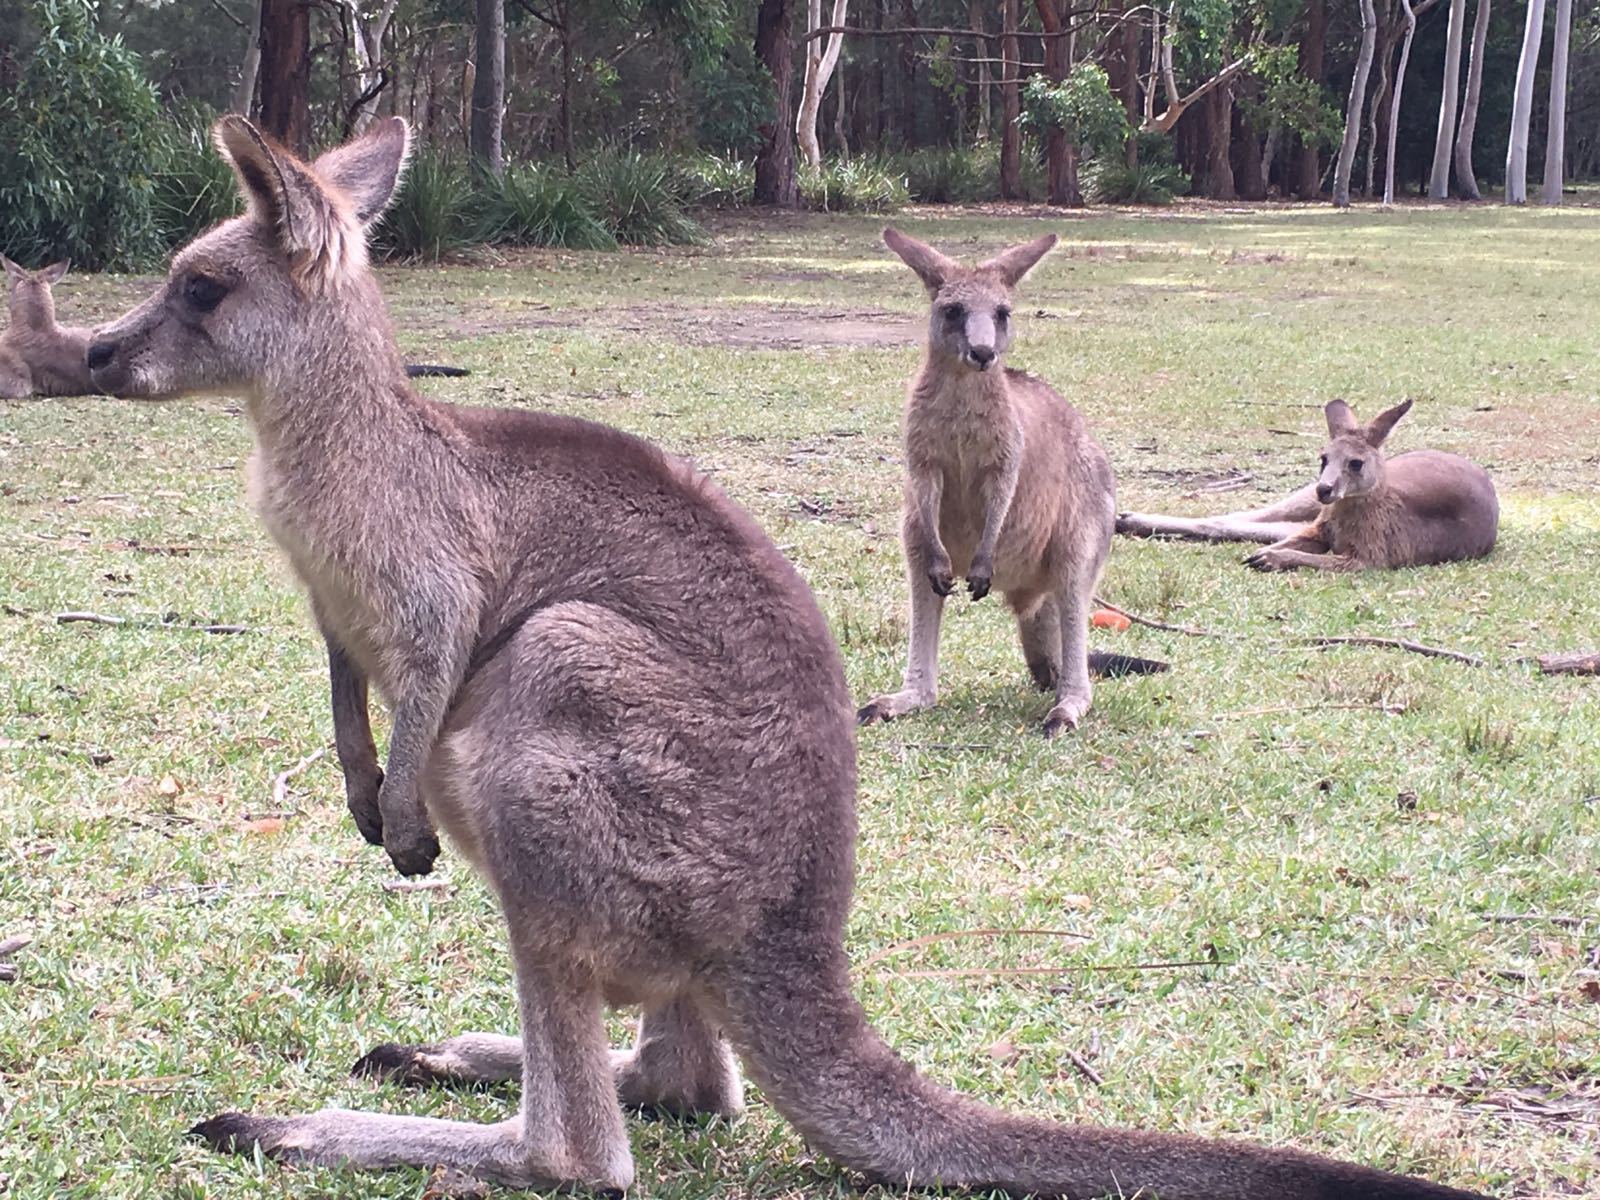 Where's the Best Place to See Wild Kangaroos in NSW? - Sydney